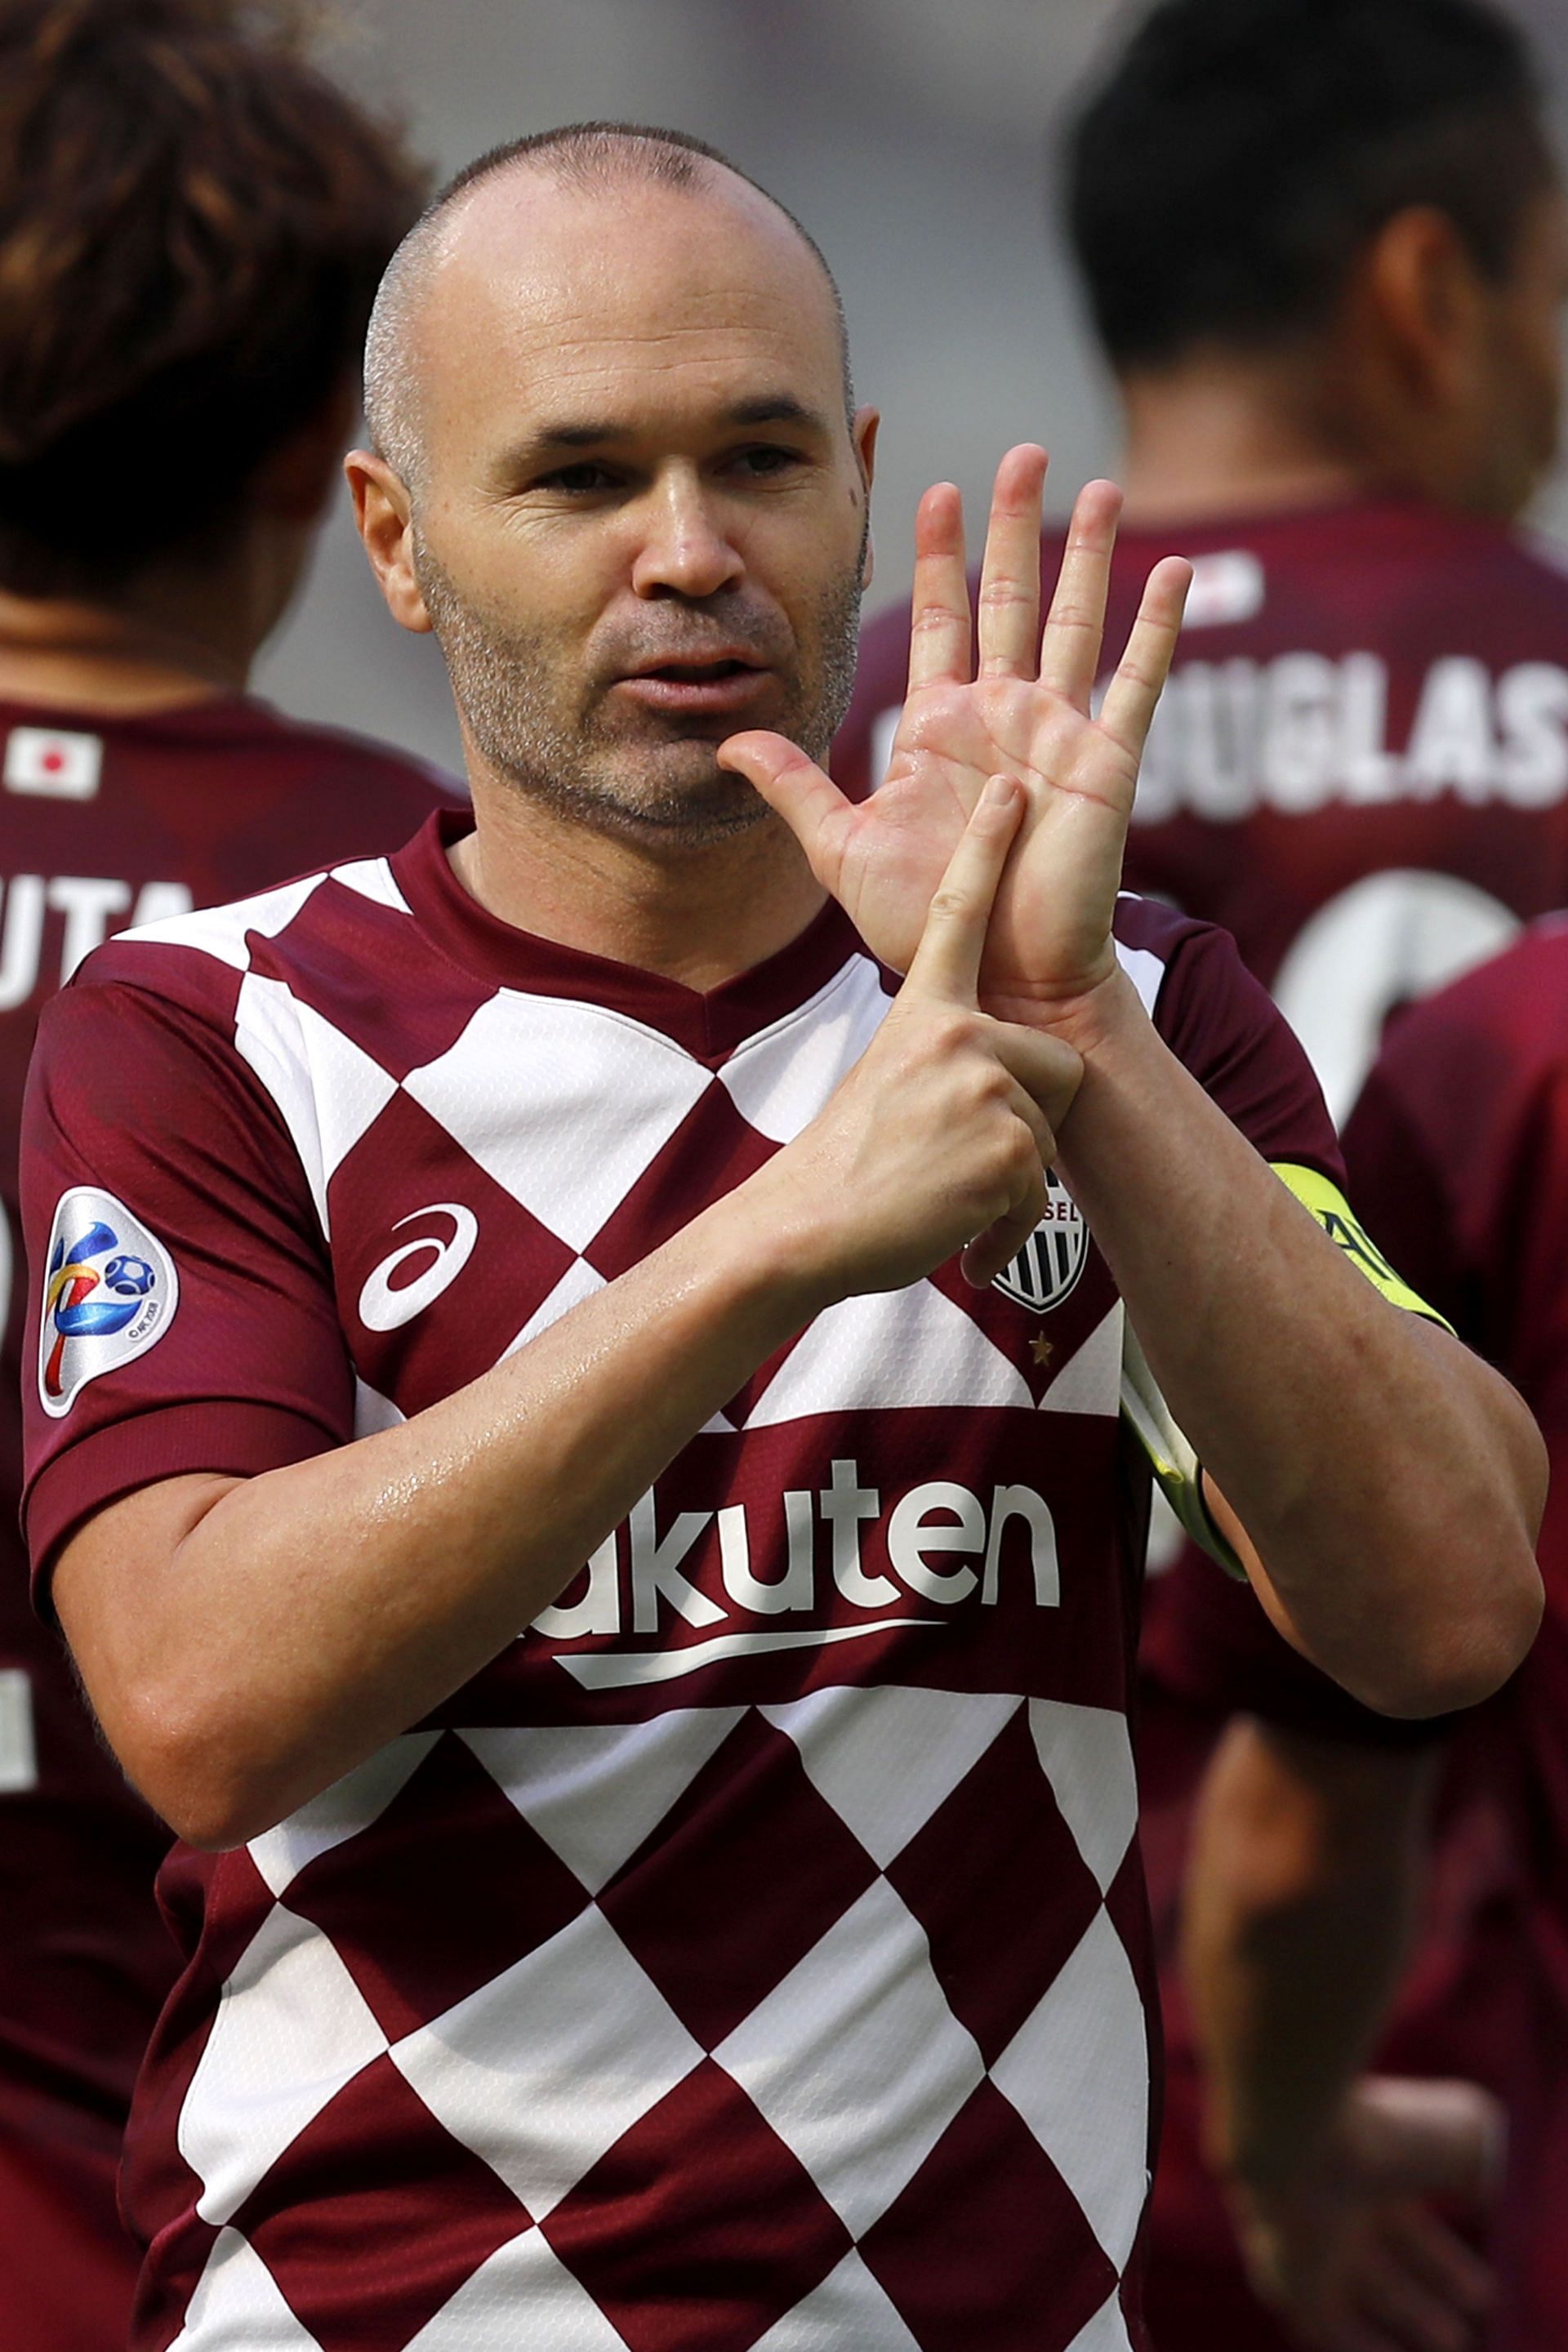 Andres Iniesta of Vissel Kobe celebrates his goal during the AFC Champions League Round of 16 match between Vissel Kobe and Shanghai SIPG at the Khalifa International Stadium on December 7, 2020